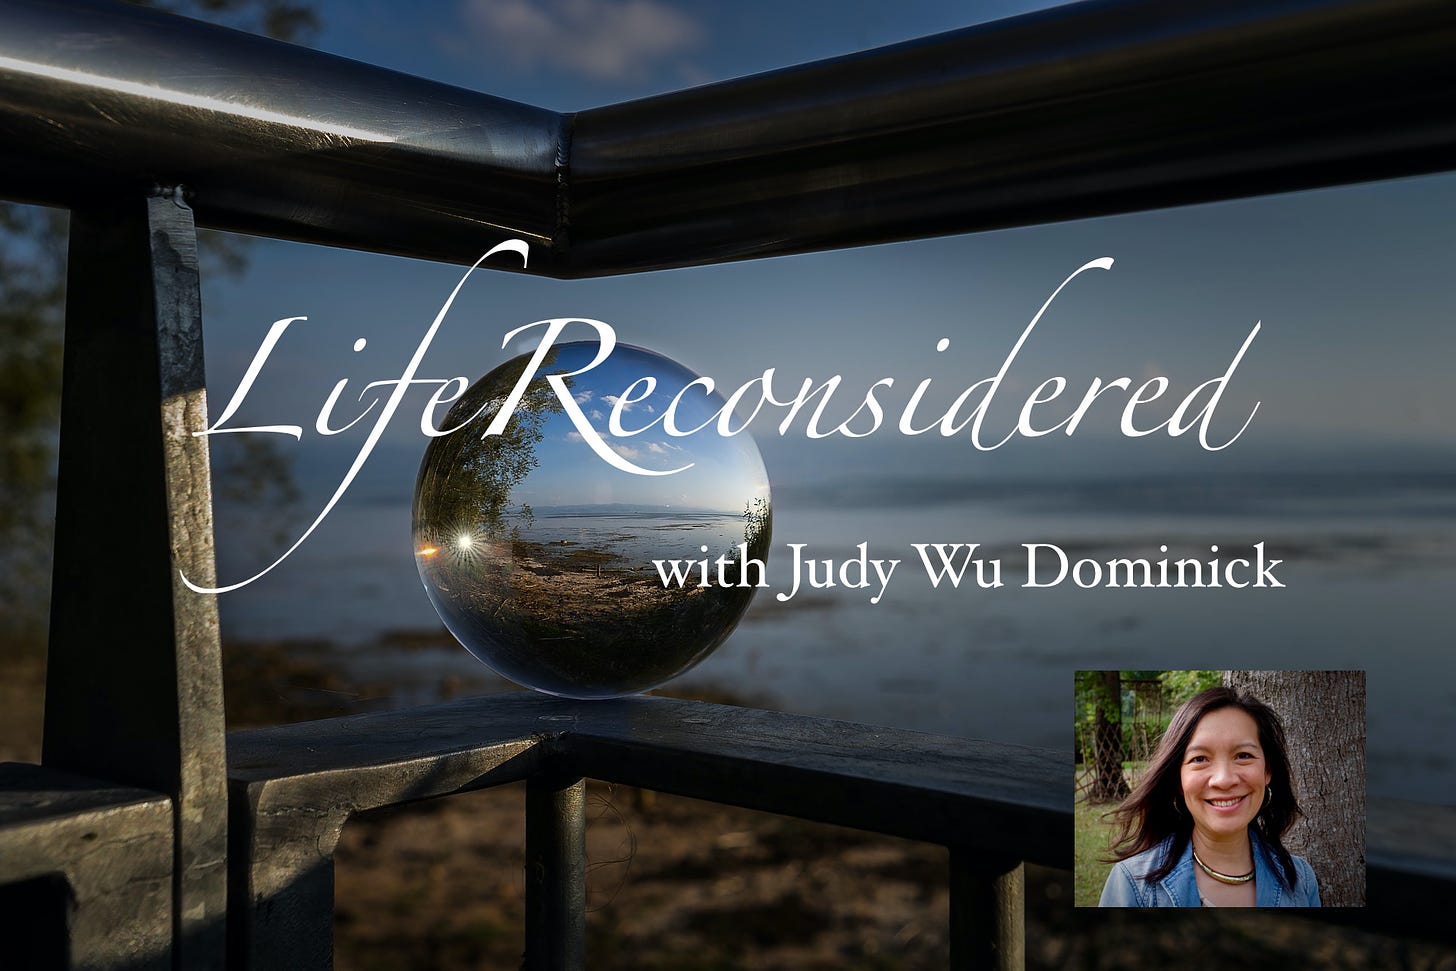 Photograph taken from a balcony near a corner railing with a glass ball showing a magnified view. Superimposed over this photo are the words, "Life Reconsidered with Judy Wu Dominick" and a thumbnail photo of Judy at the bottom right hand corner.